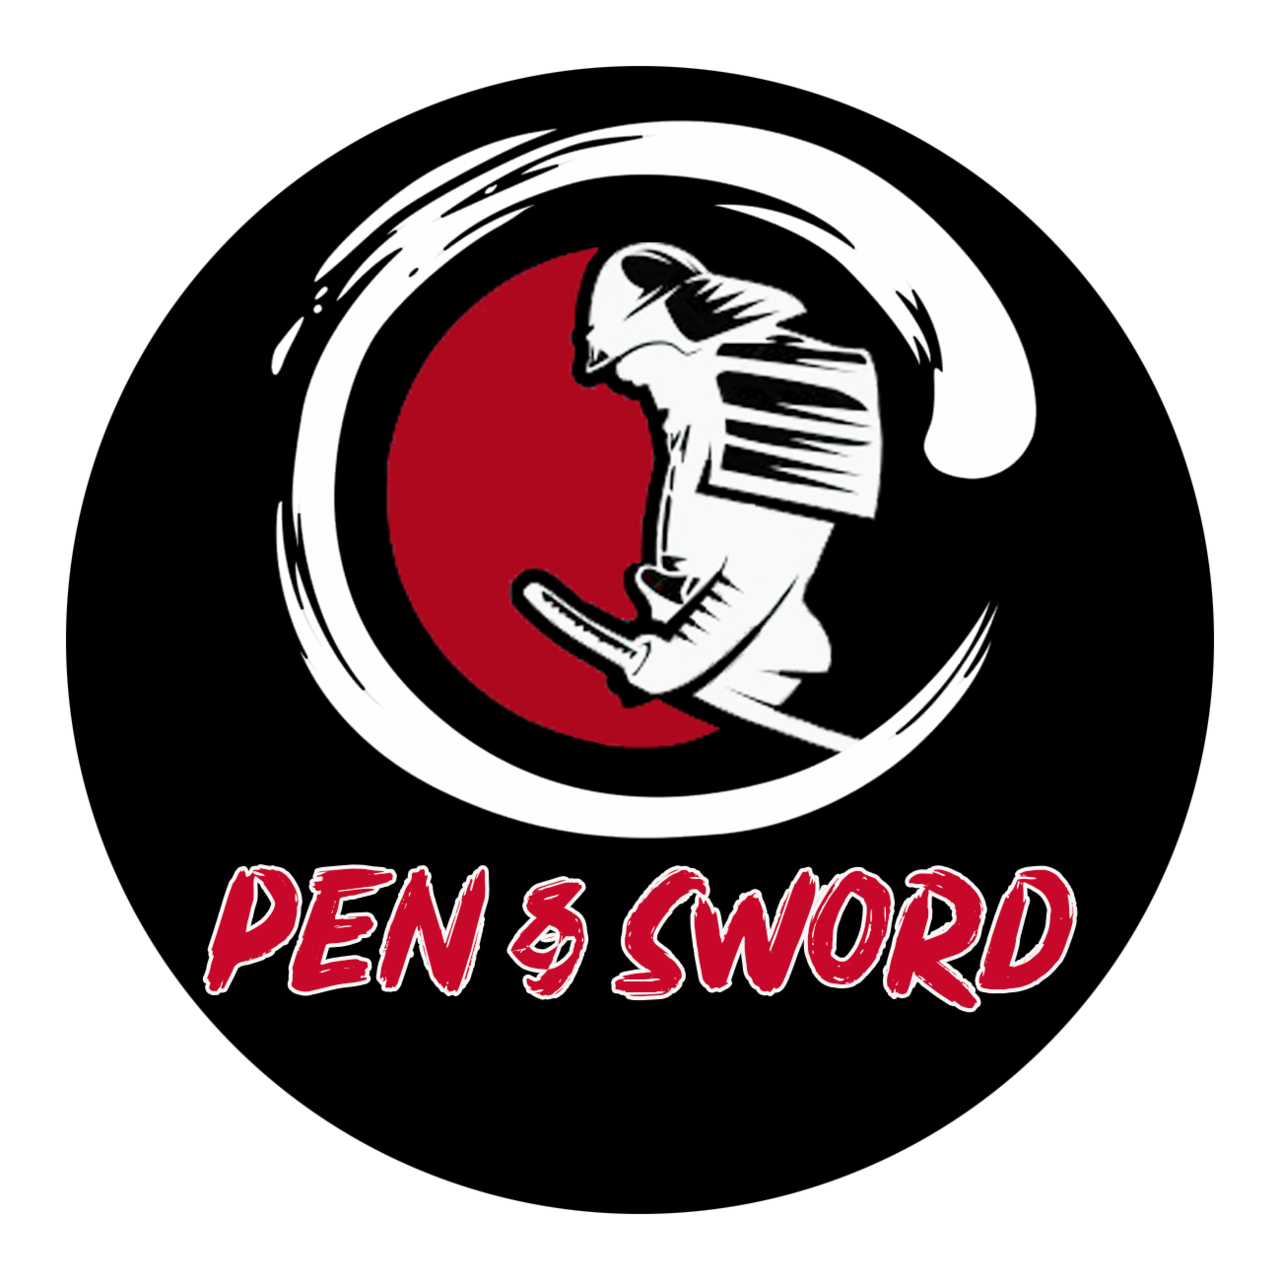 The Pen and Sword Journal